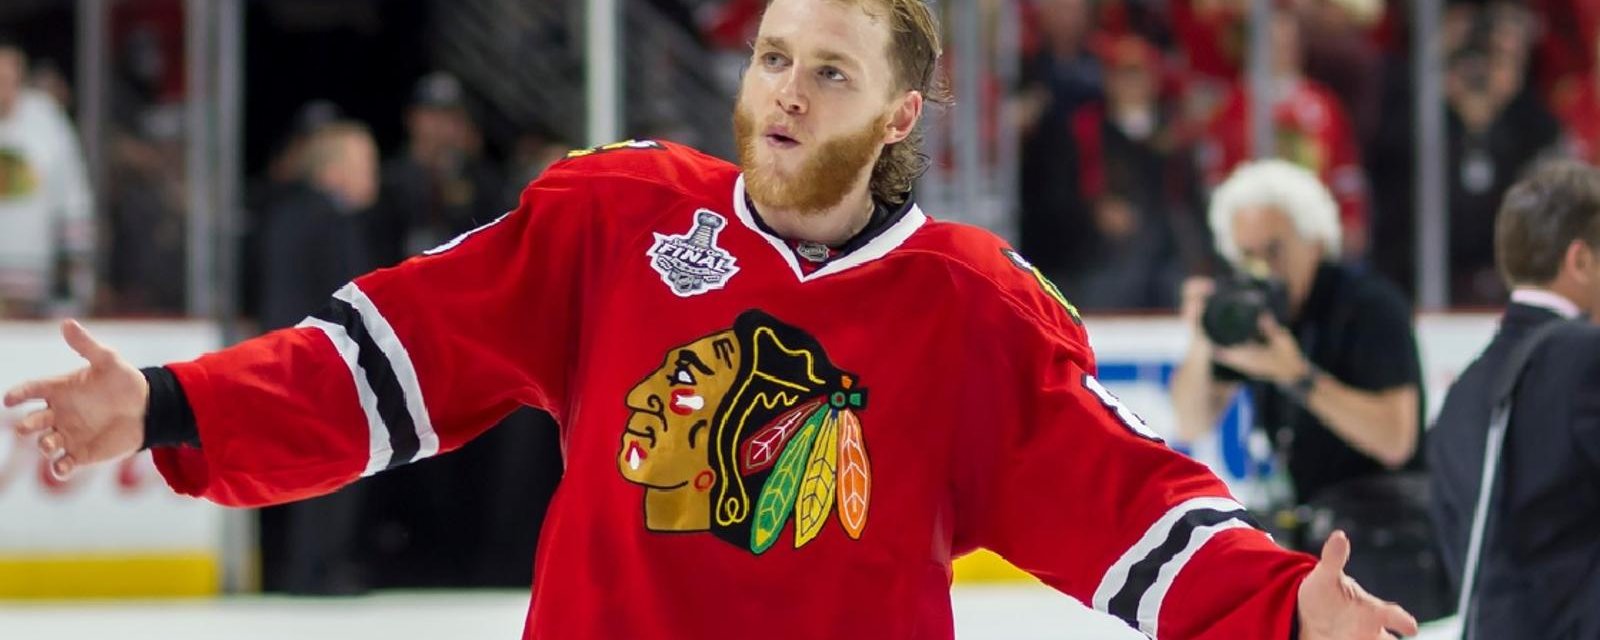 Ryan Whitney is convinced he knows where Patrick Kane will be traded!